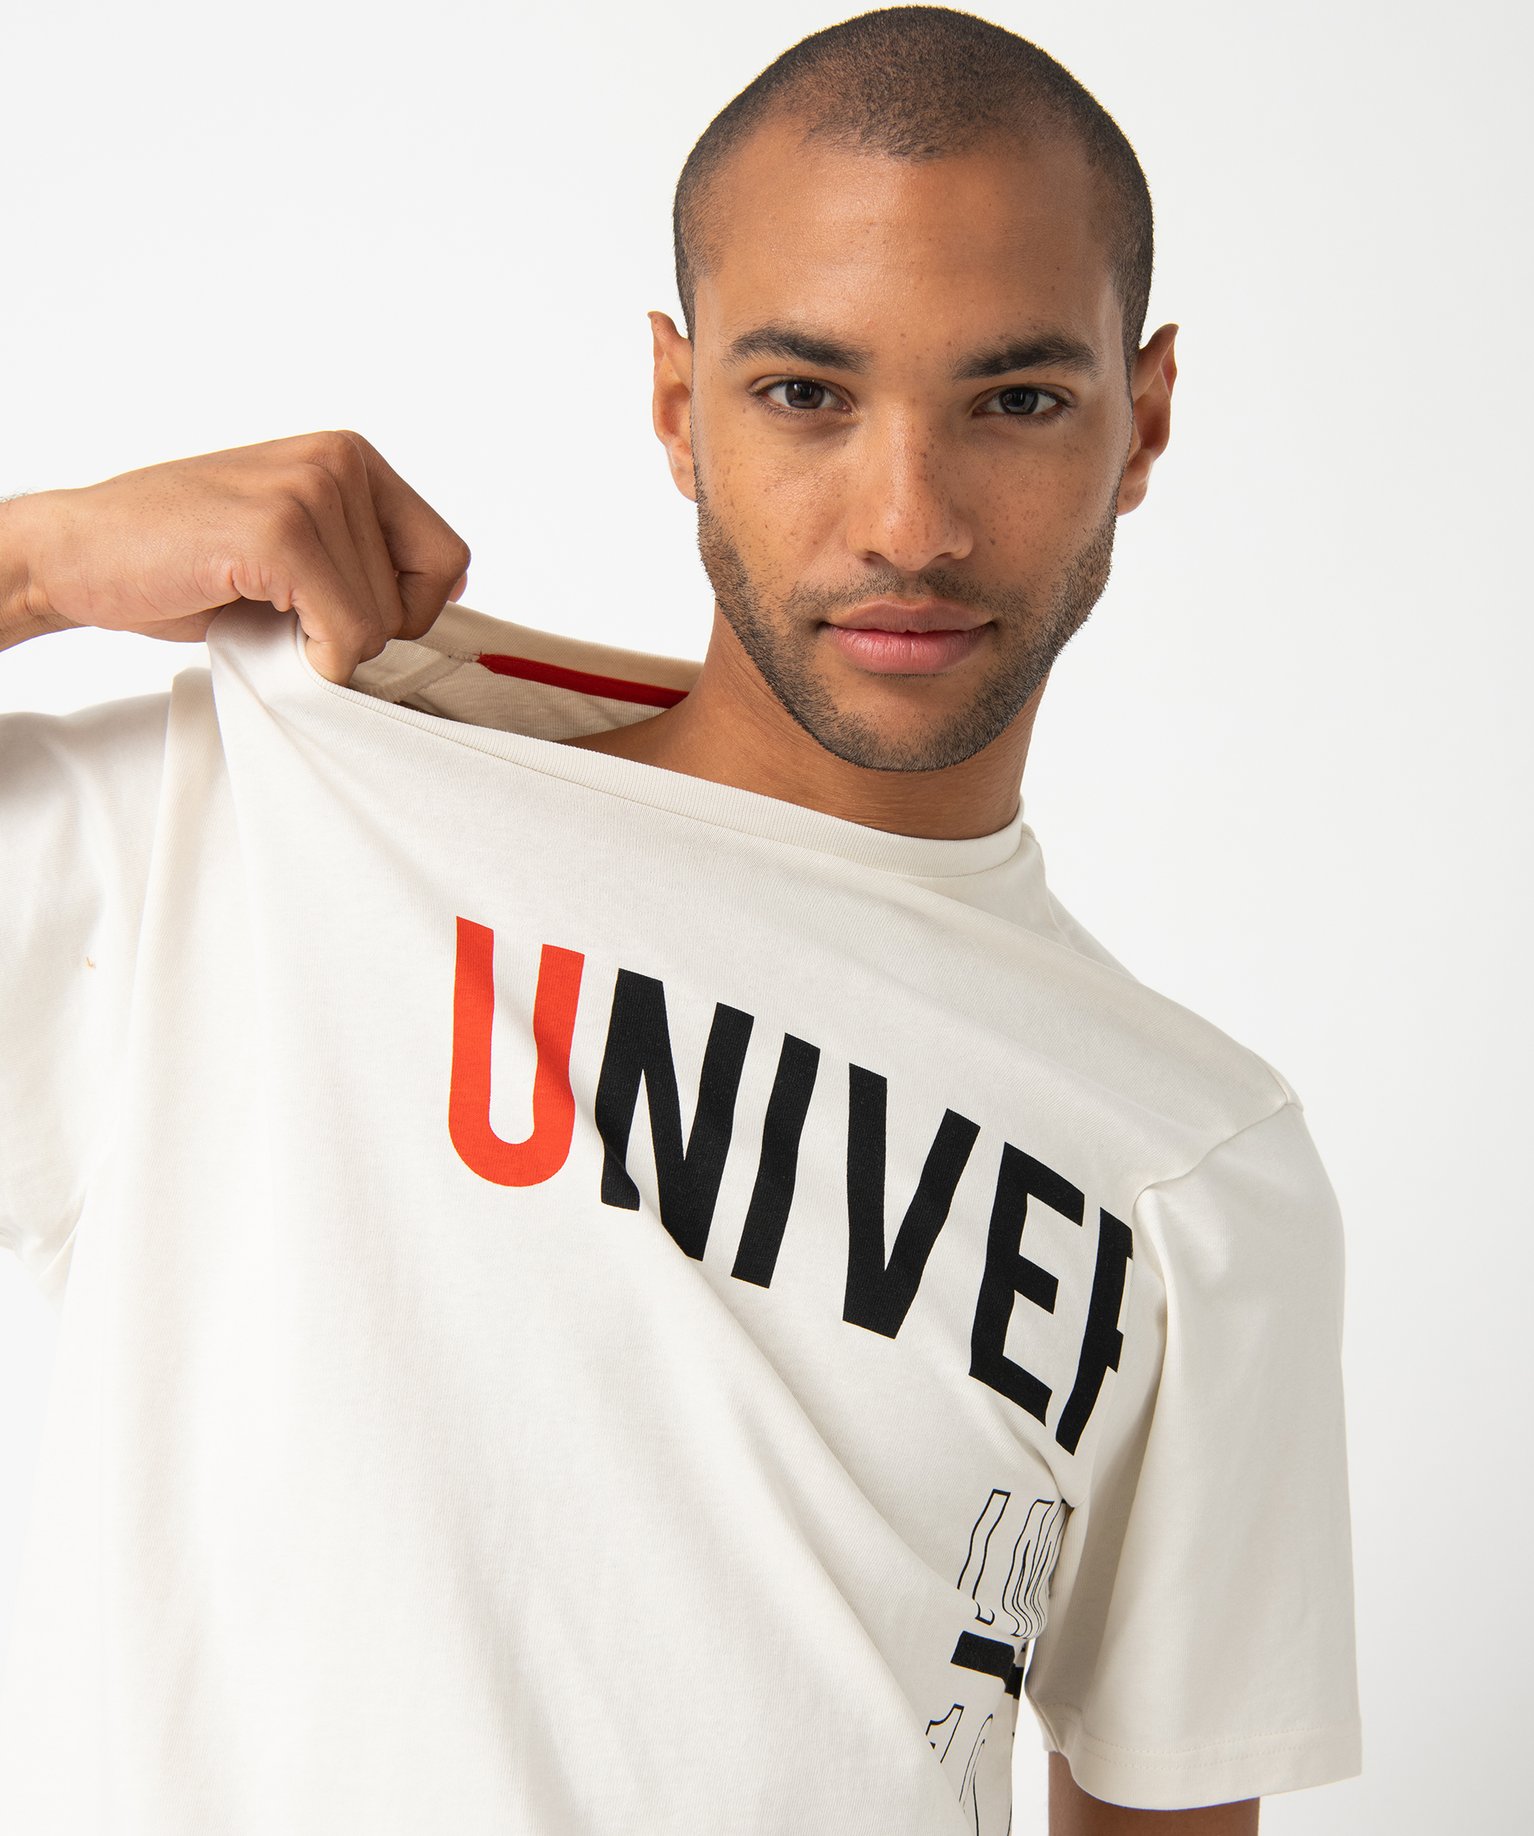 tee-shirt homme a manches courtes oversize avec inscriptions blanc tee-shirts